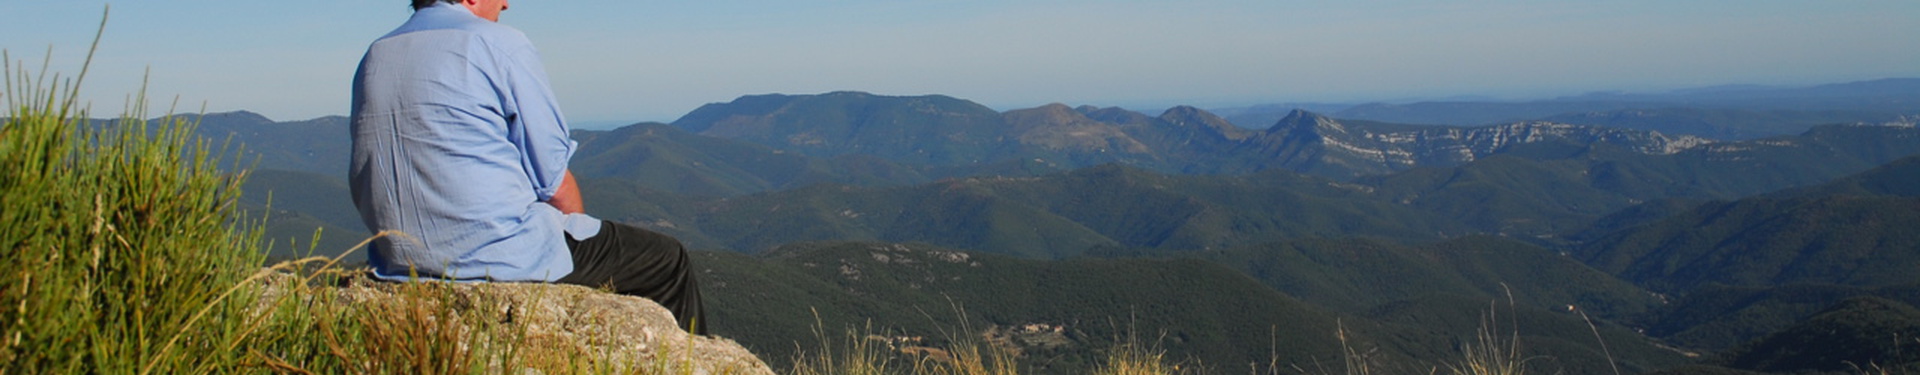 Quote request form - Star of the Cévennes - Guided walking trip | Nature Occitane